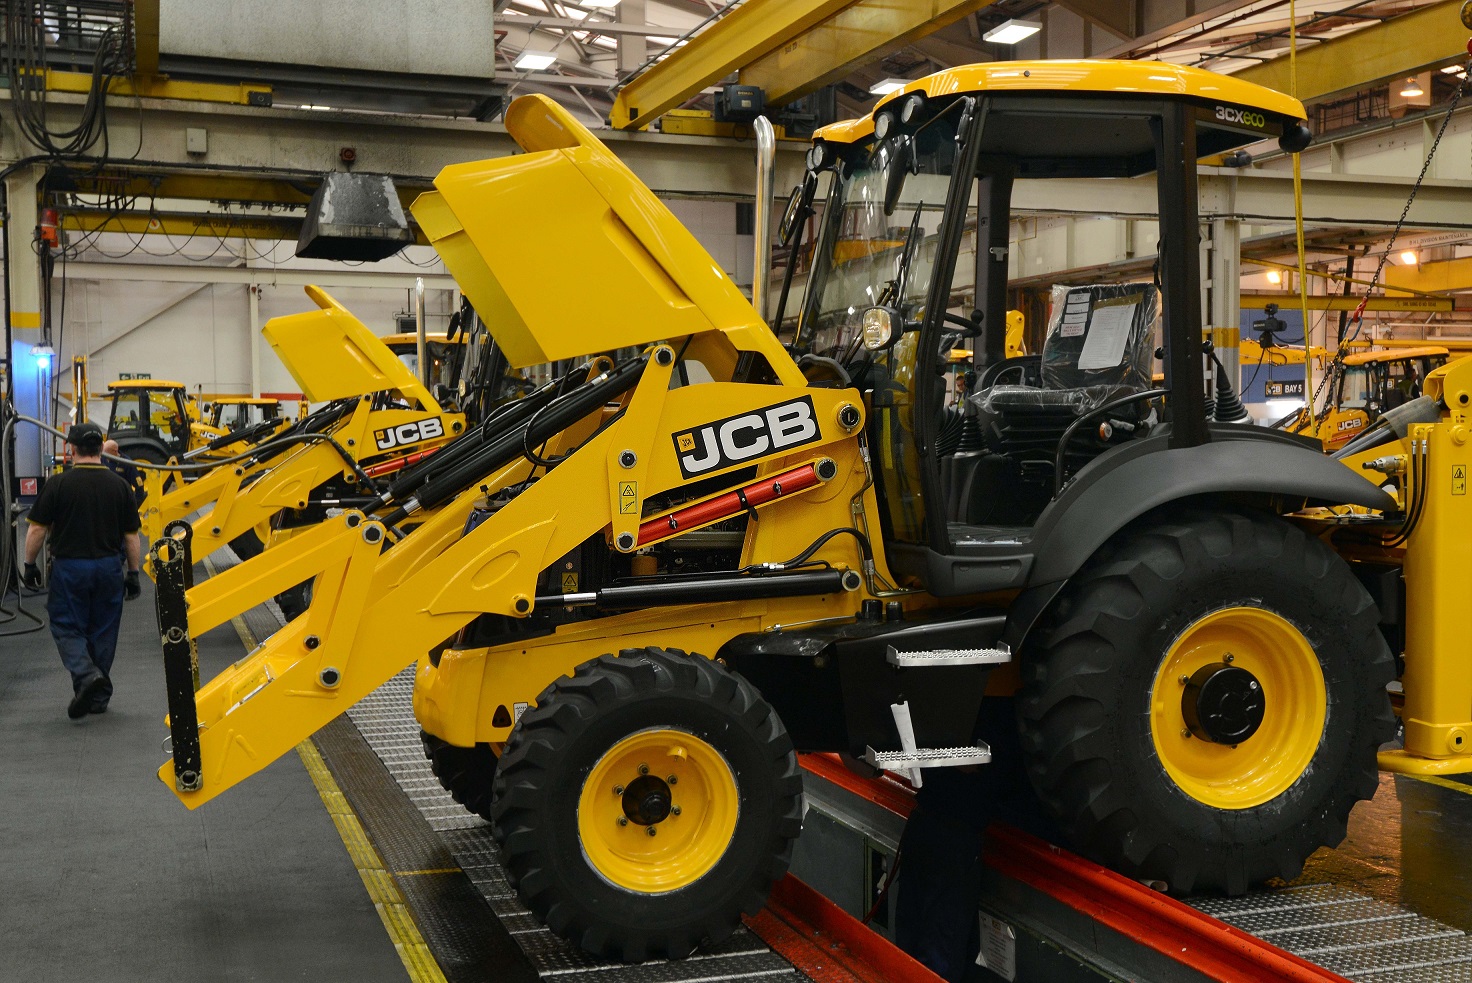 Production has ceased at all of JCB's nine UK plants